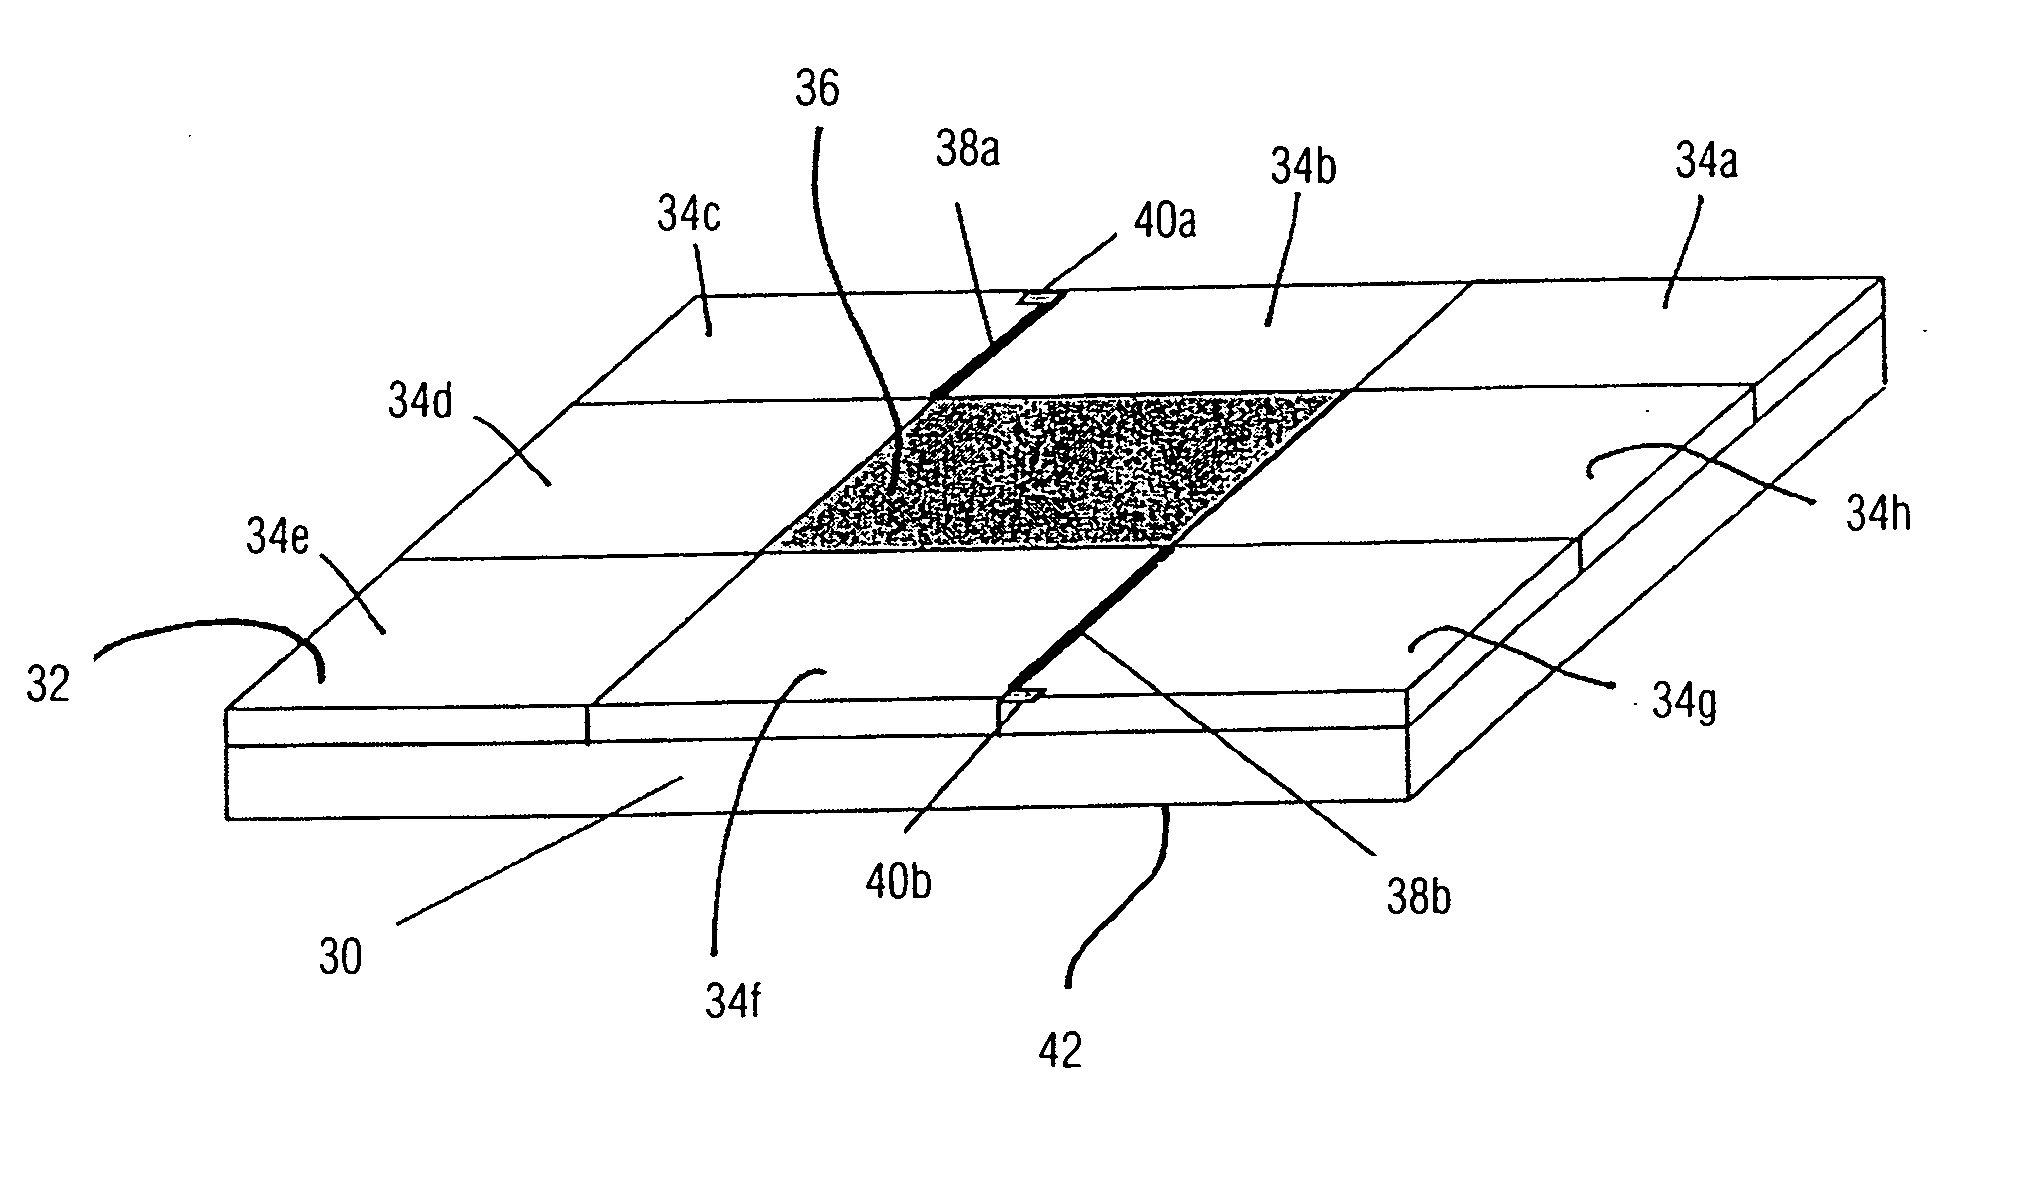 Opto-electronic device having a light-emitting diode and a light sensor